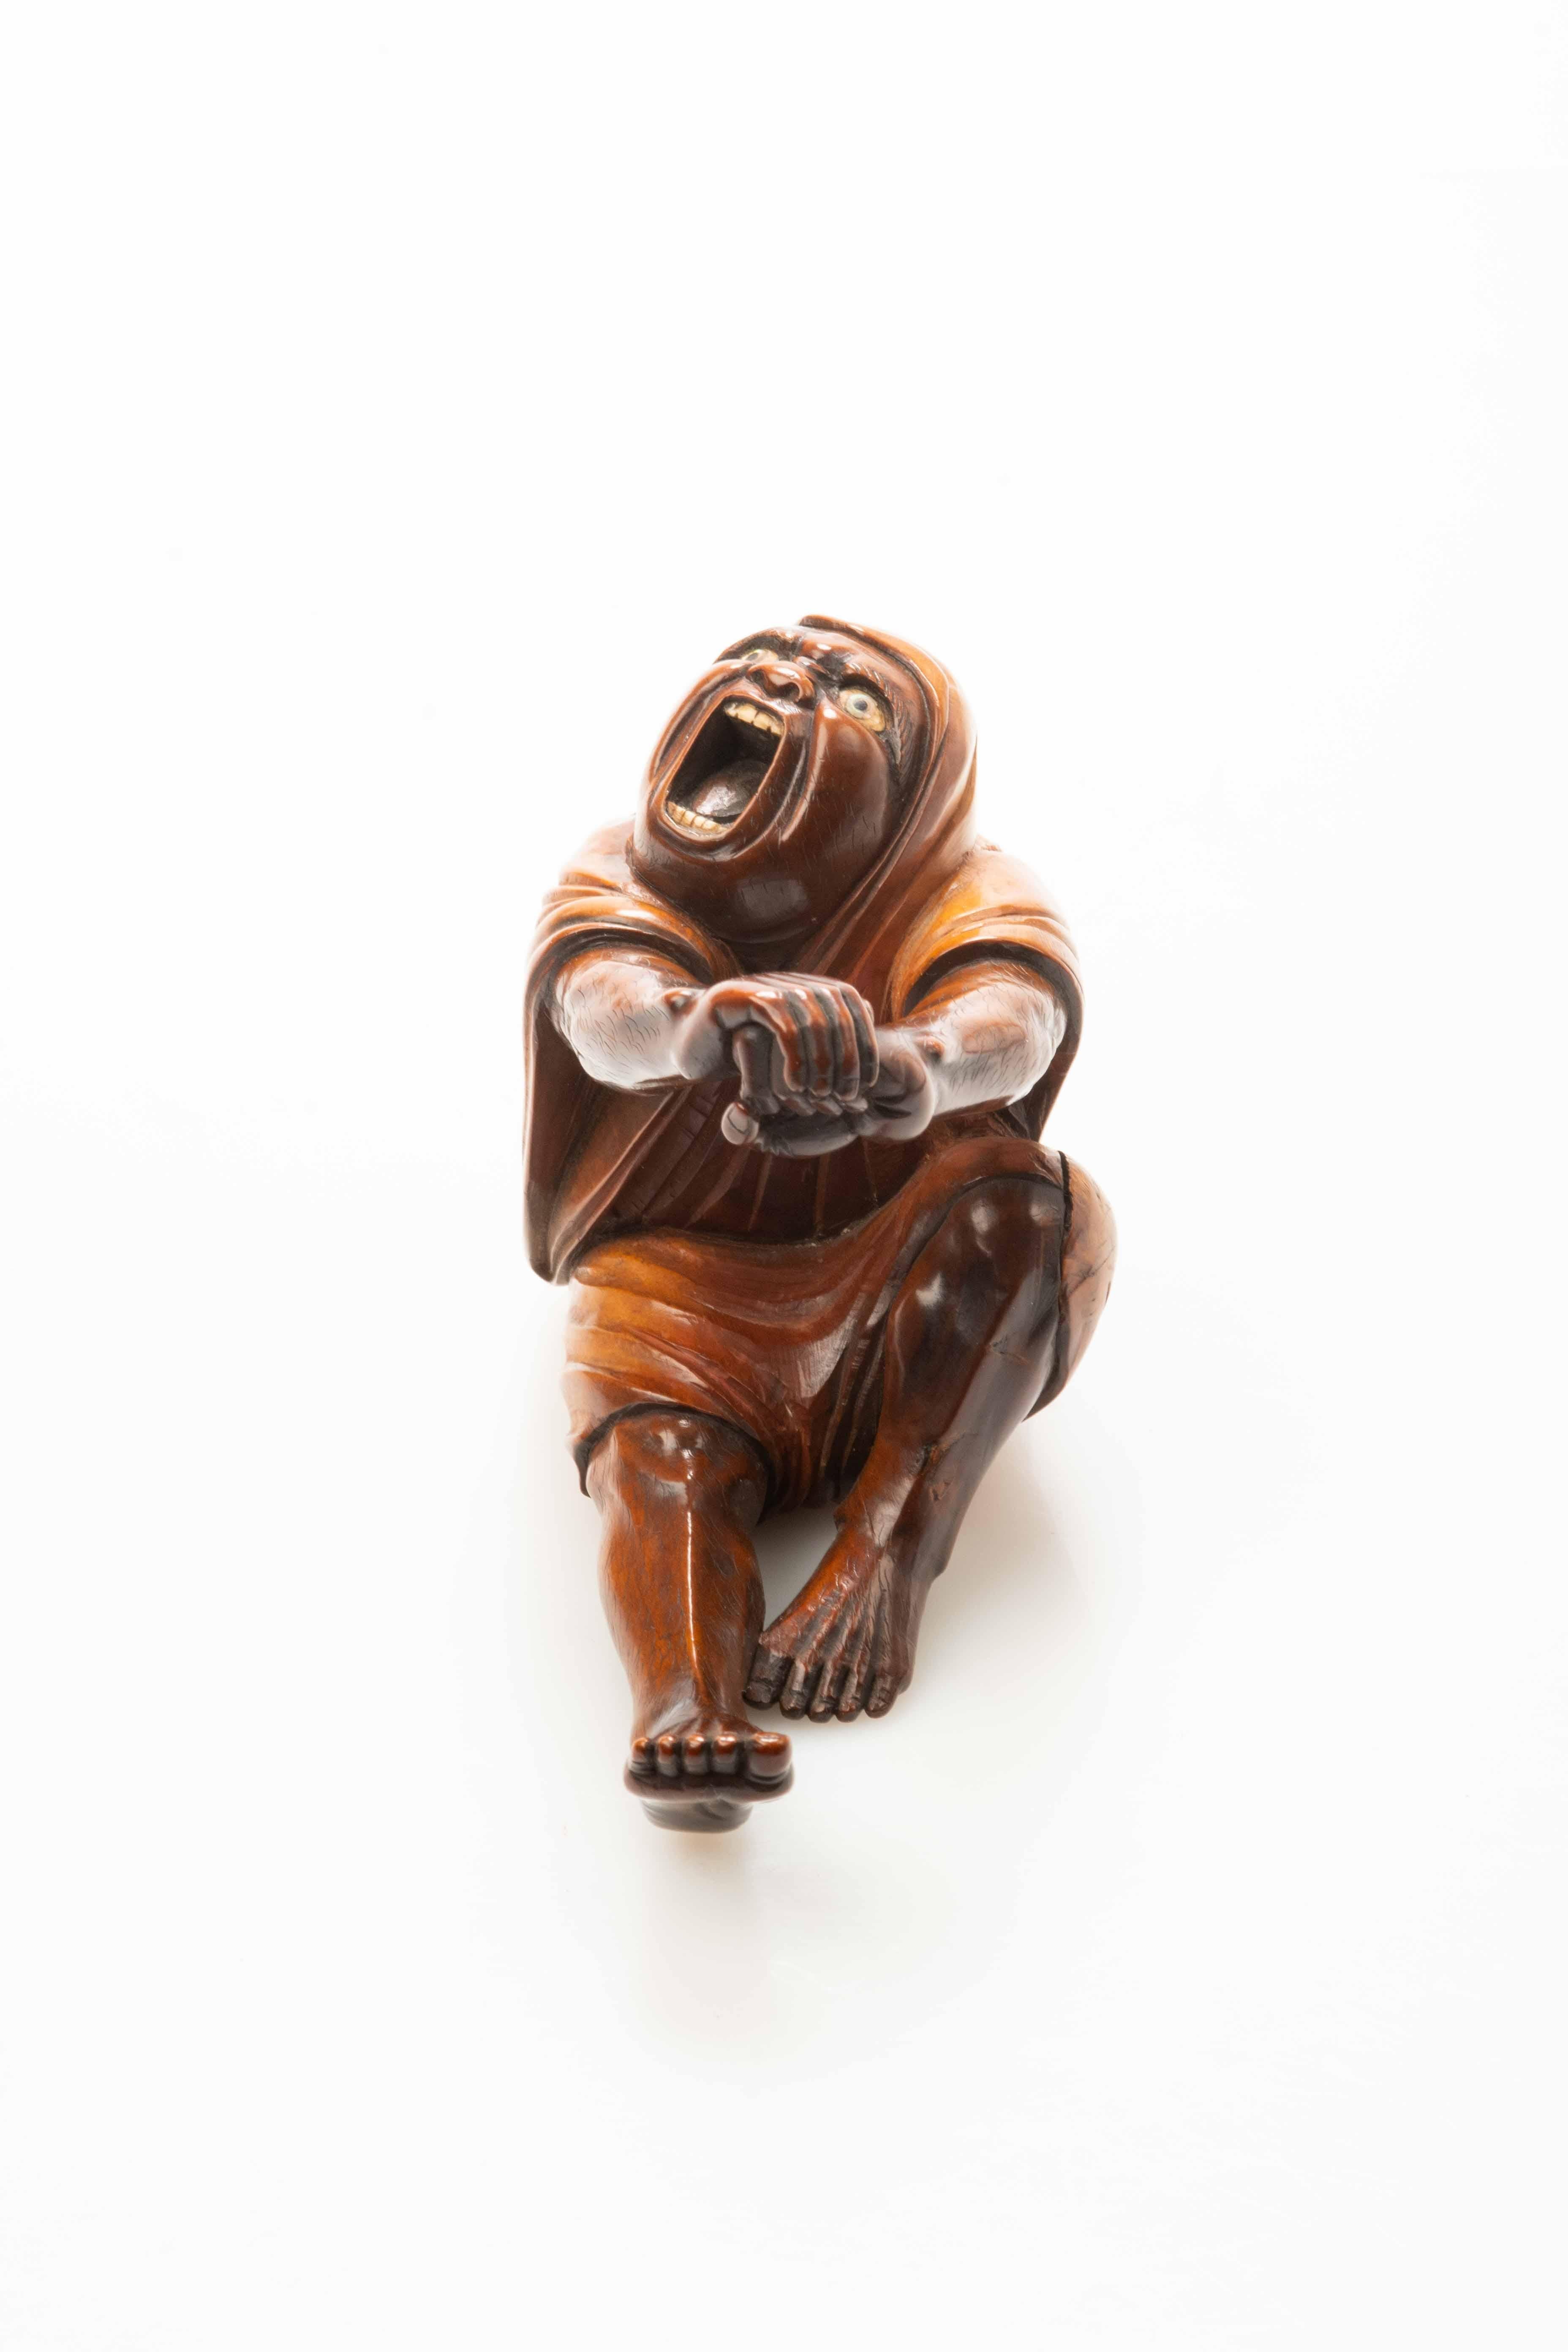 Boxwood okimono with horn and mother of pearl, portraying the moment of Daruma's awakening. The figure, sitting and stretching, has wide eyes and an open mouth.

Under the base, the signature “Tomokata” is engraved on red lacquer.

Origin: